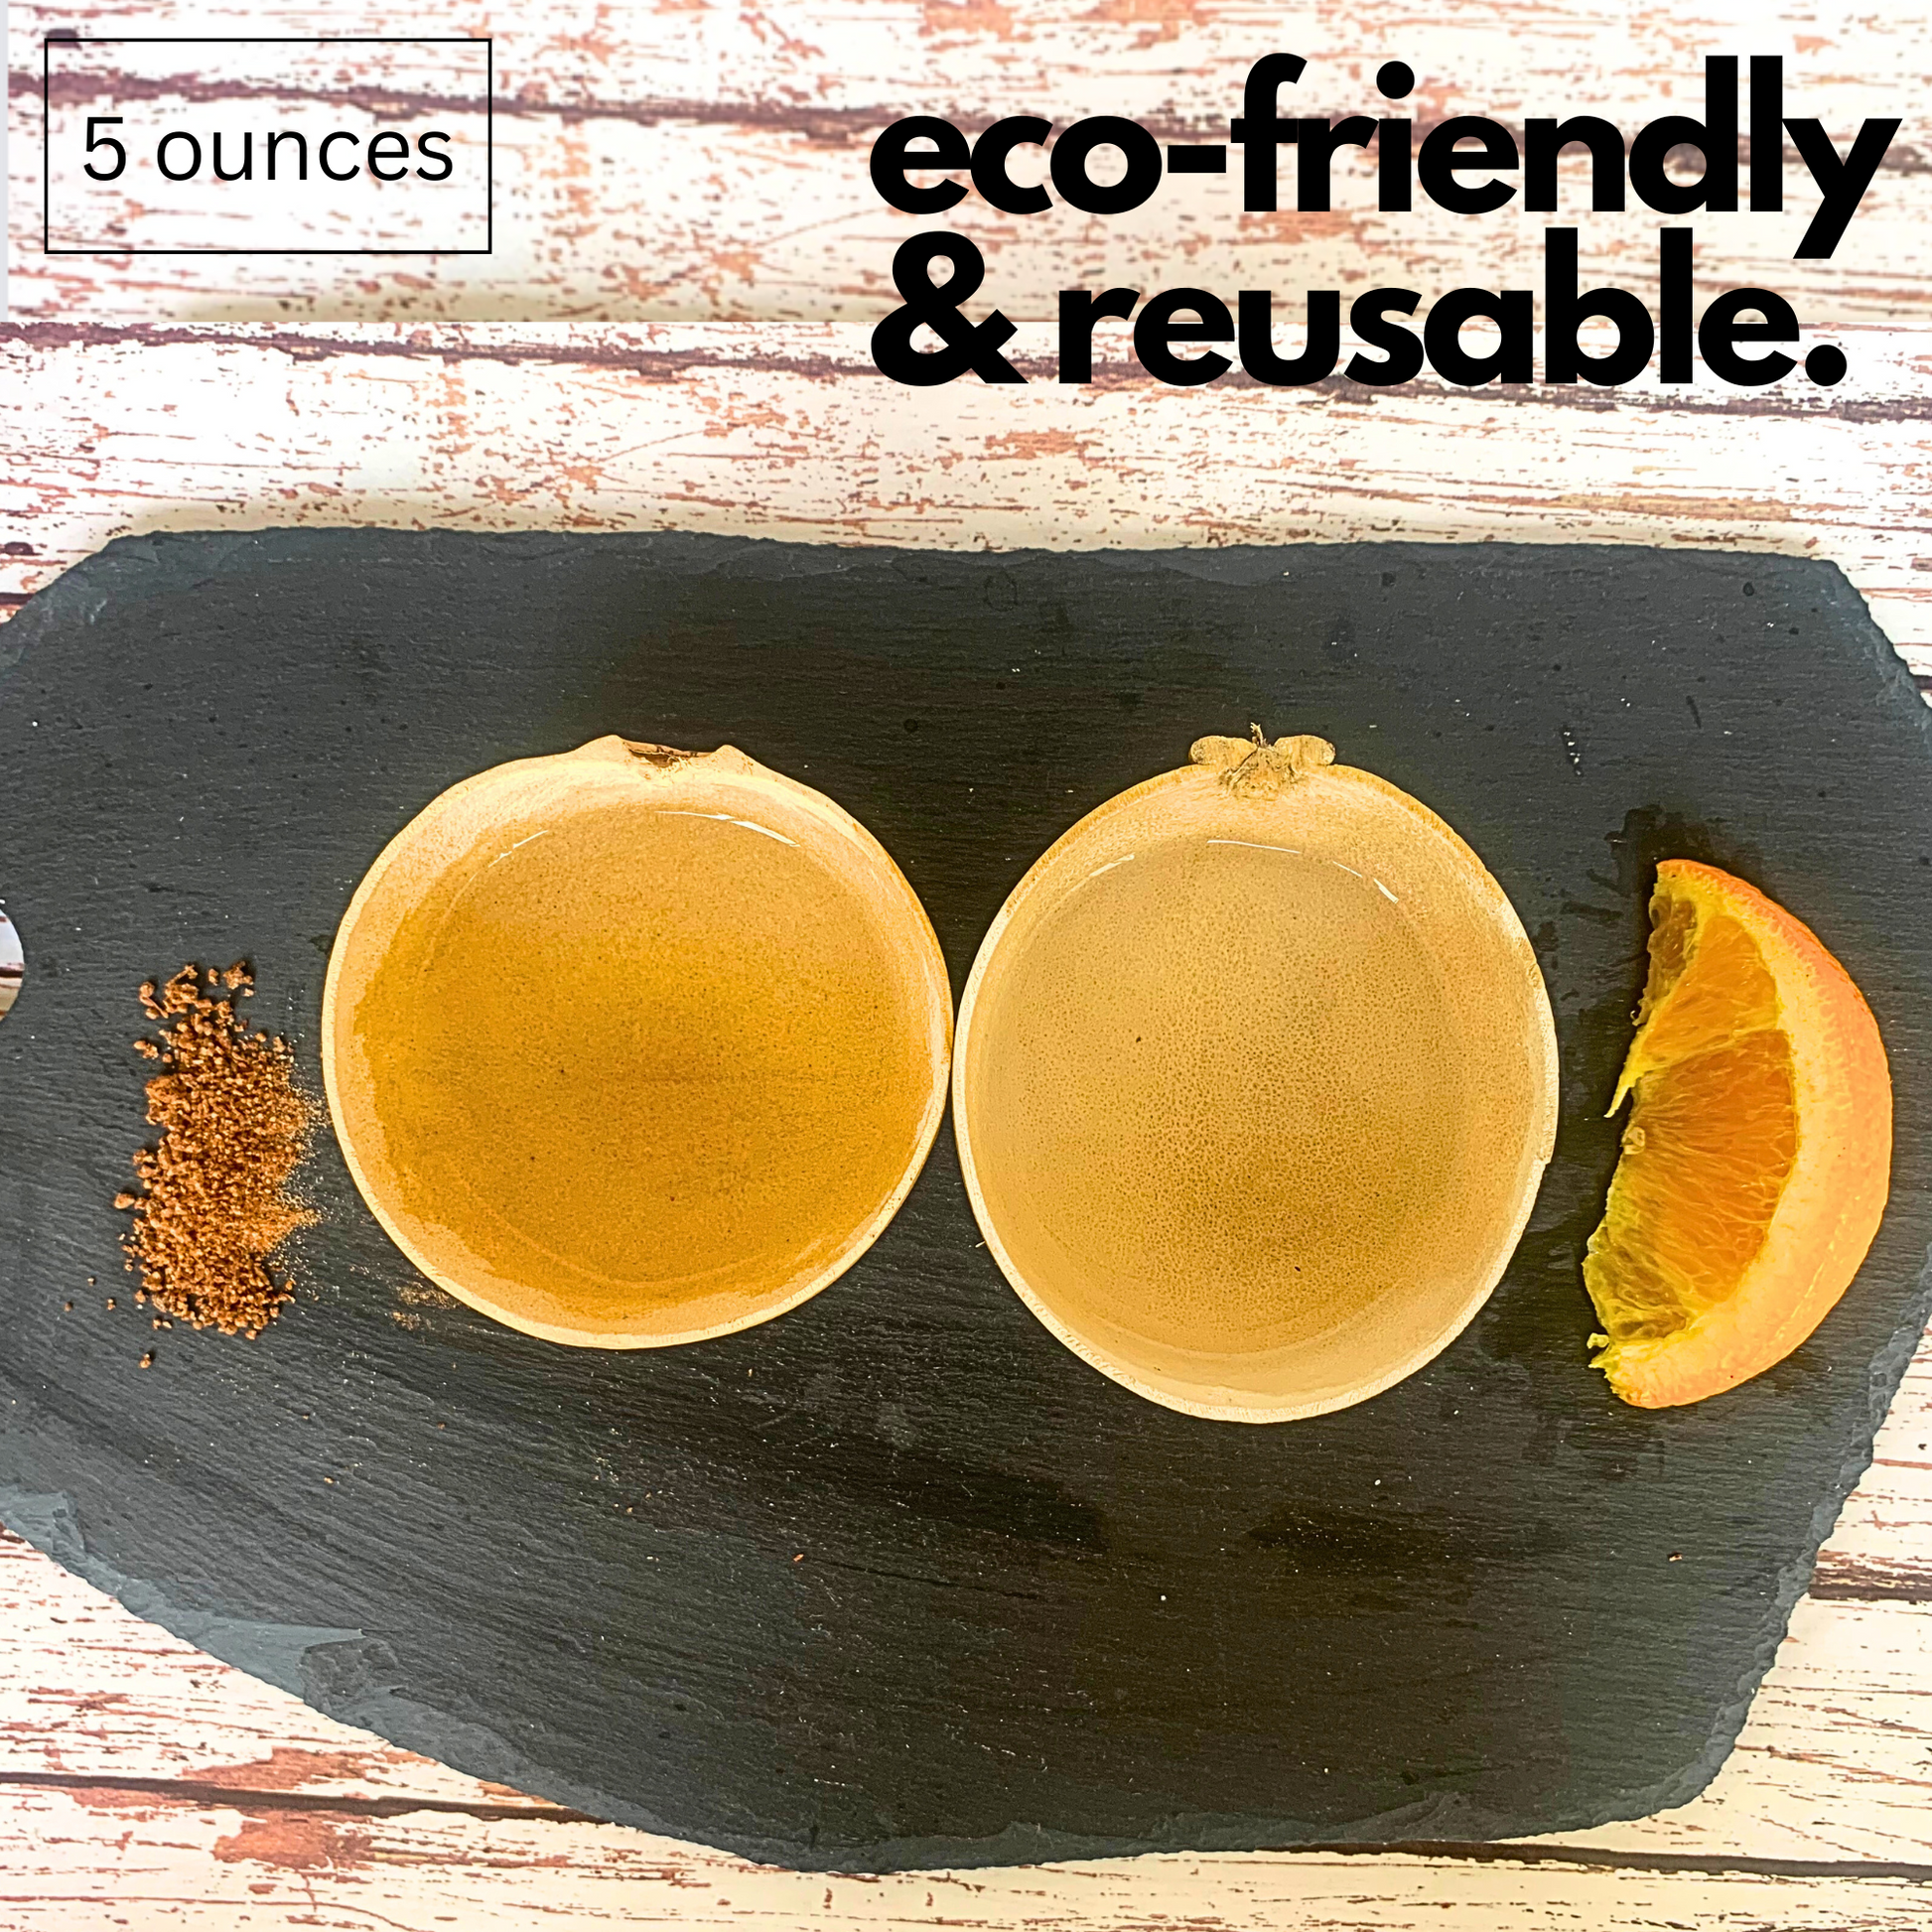 eco-friendly Handmade 5oz Mezcal Jicaras Cups from Mexico, perfect for enjoying agave spirits in a traditional manner, supporting sustainability.